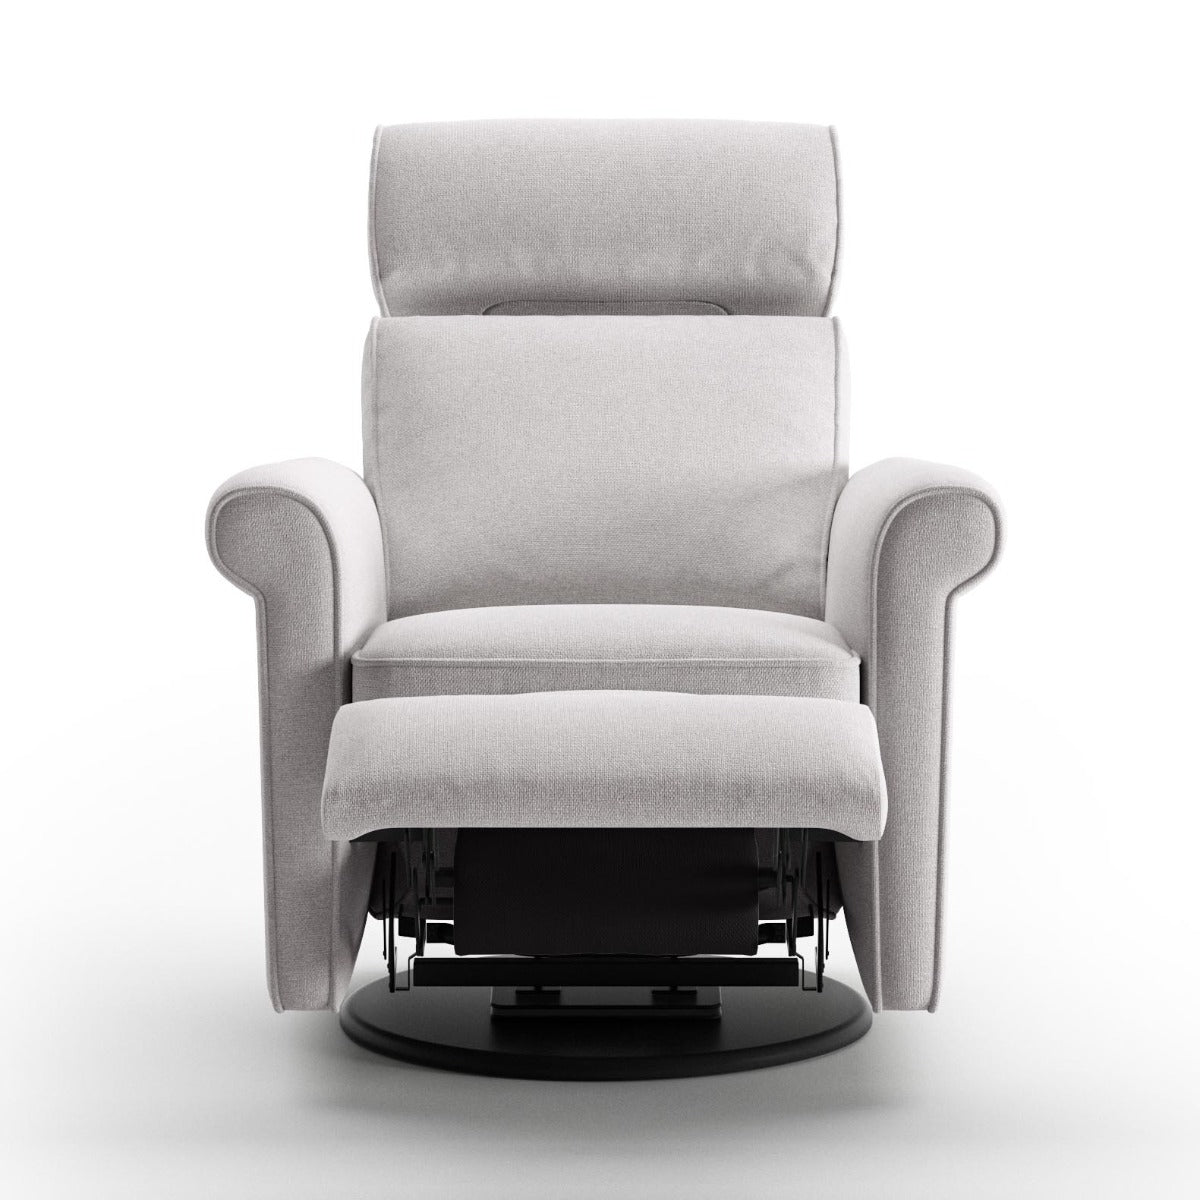 Luonto Furniture Rolled Recliner - Power & Battery - Rene 01